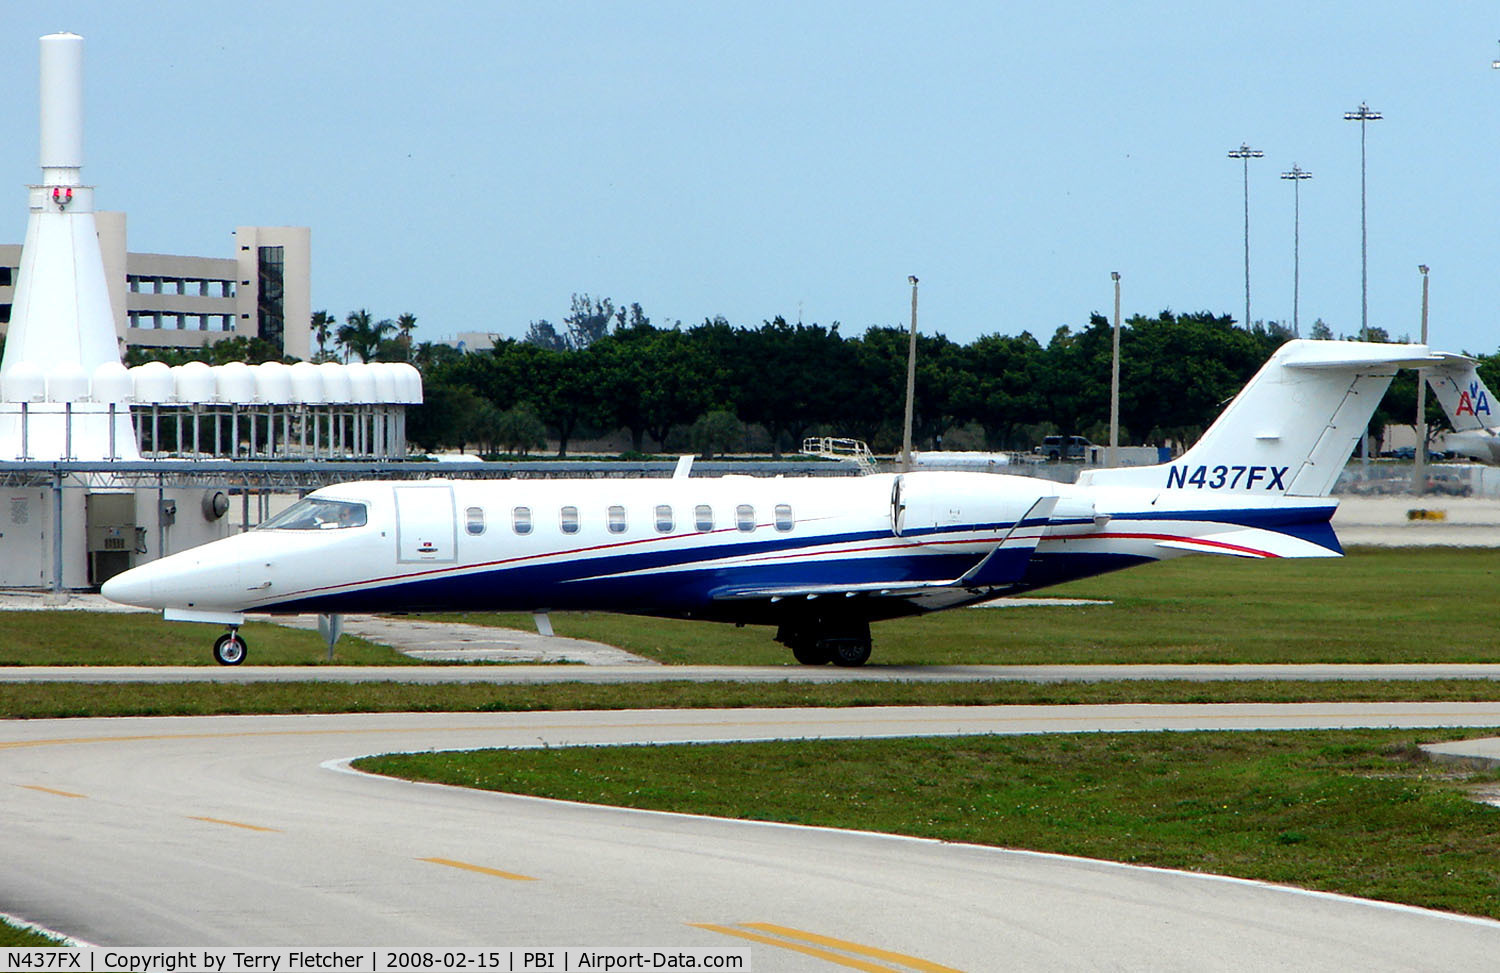 N437FX, 2006 Learjet 45 C/N 315, The business aircraft traffic at West Palm Beach on the Friday before President's Day always provides the aviation enthusiast / photographer with a treat